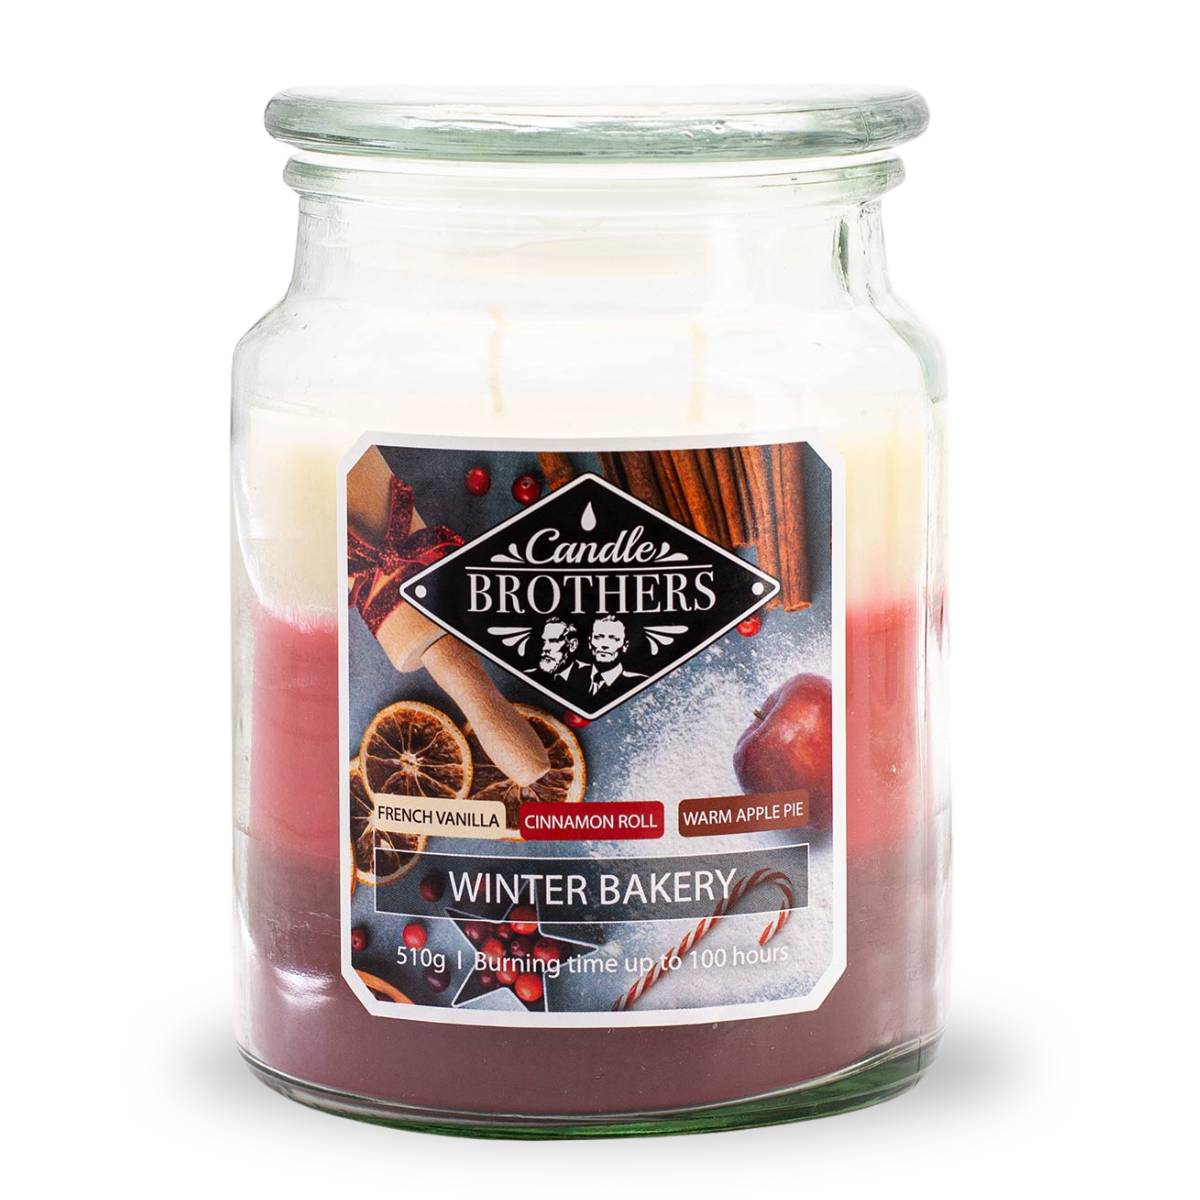 Winter Bakery - Duftkerze 510g von Candle Brothers